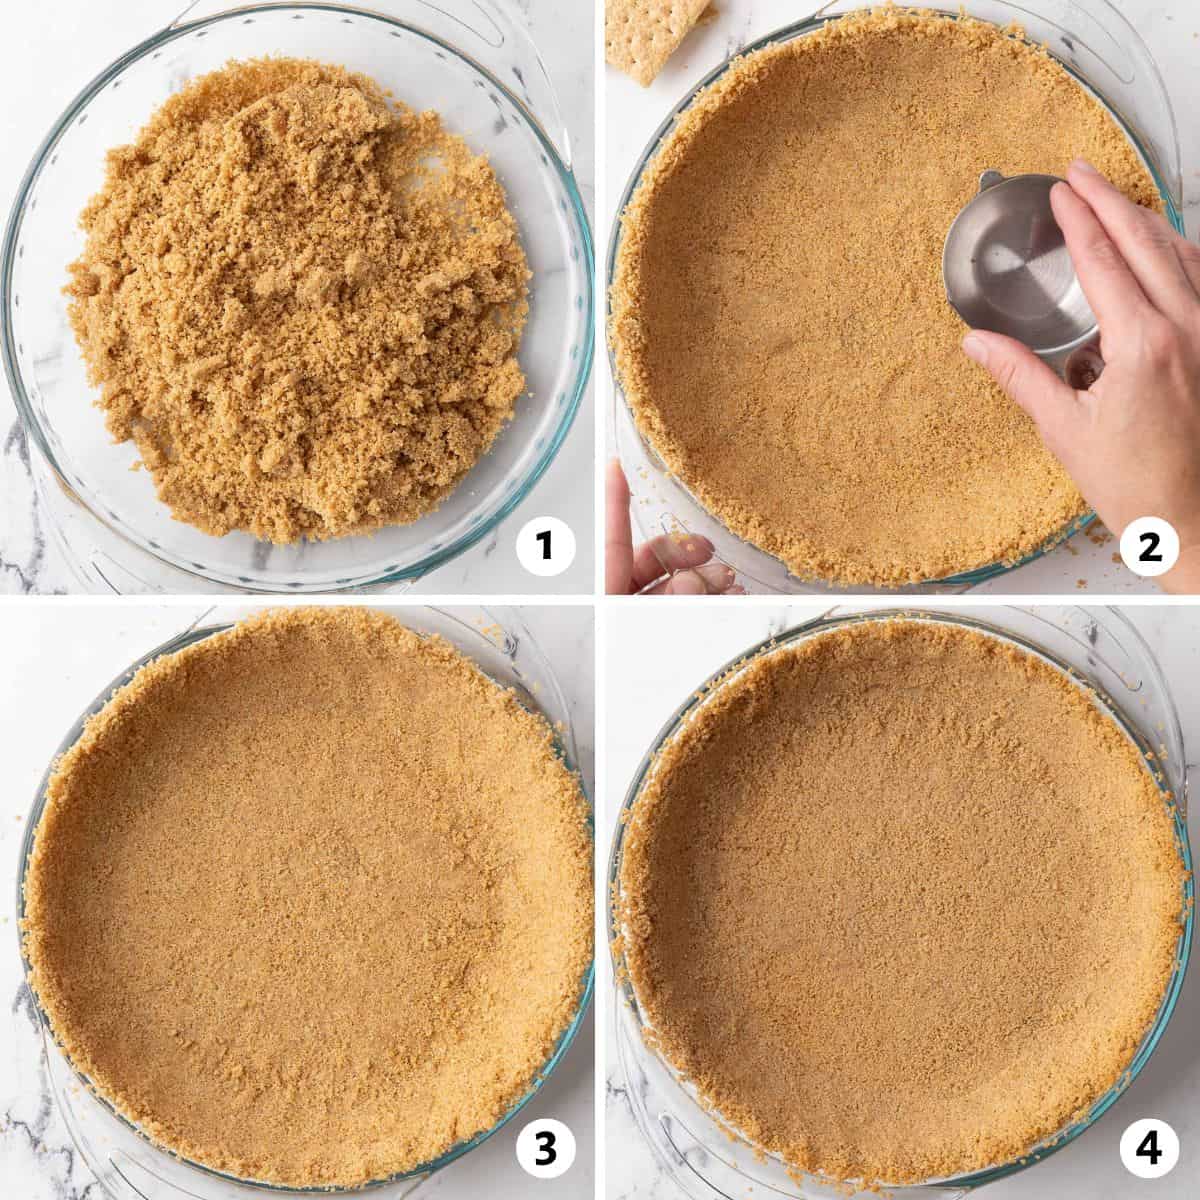 4 image collage preparing pie crust in a glass pie plate: 1- prepared crumbs in pie plate, 2- flat side of measuring cup pressing crumbs evenly into plate, 3- before baking, 4- after baking.